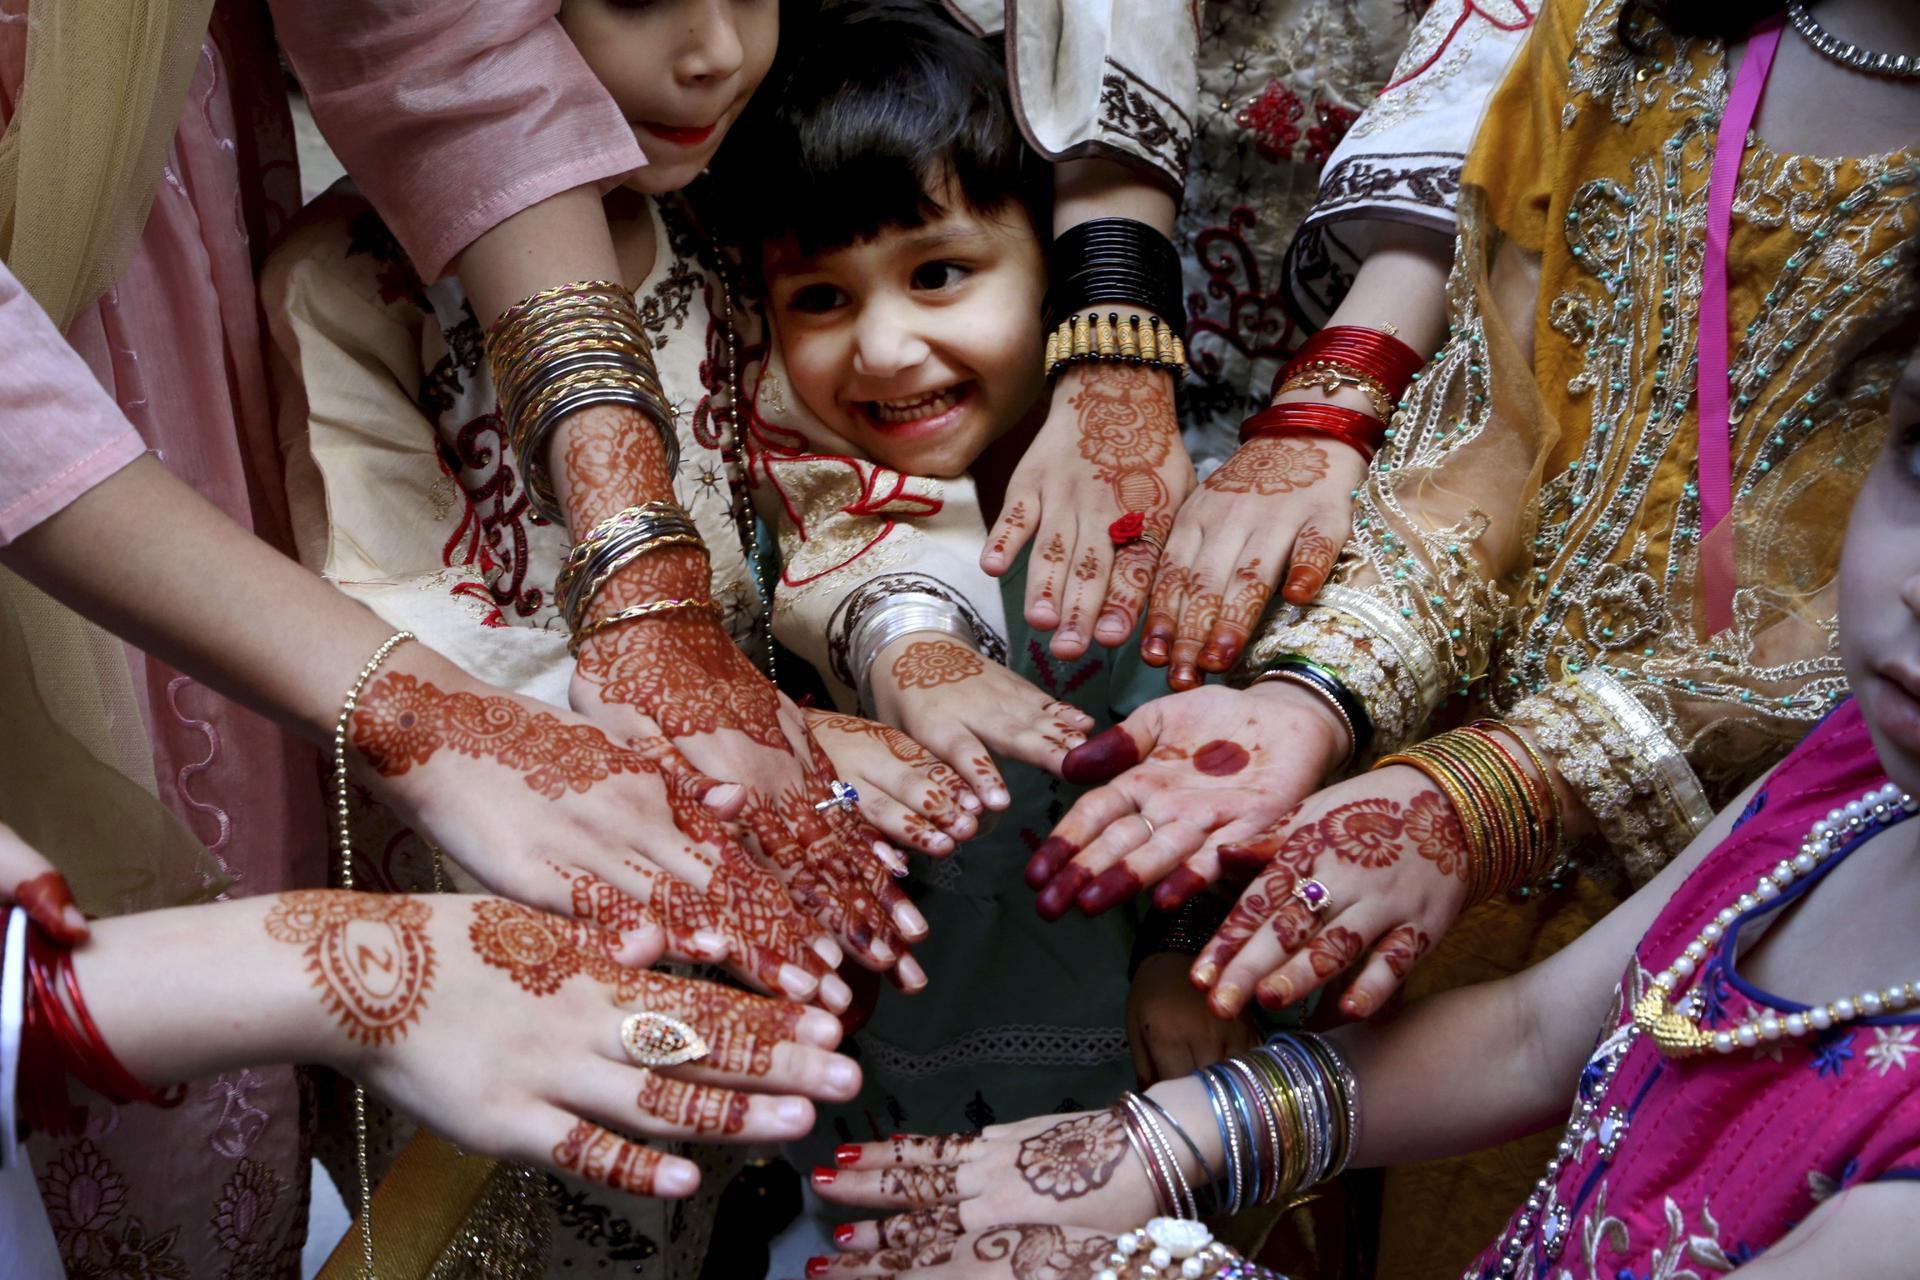 Muslim girls display their hands painted with traditional henna to celebrate Eid al-Fitr holidays, marking the end of the fasting month of Ramadan, in Peshawar, Pakistan.